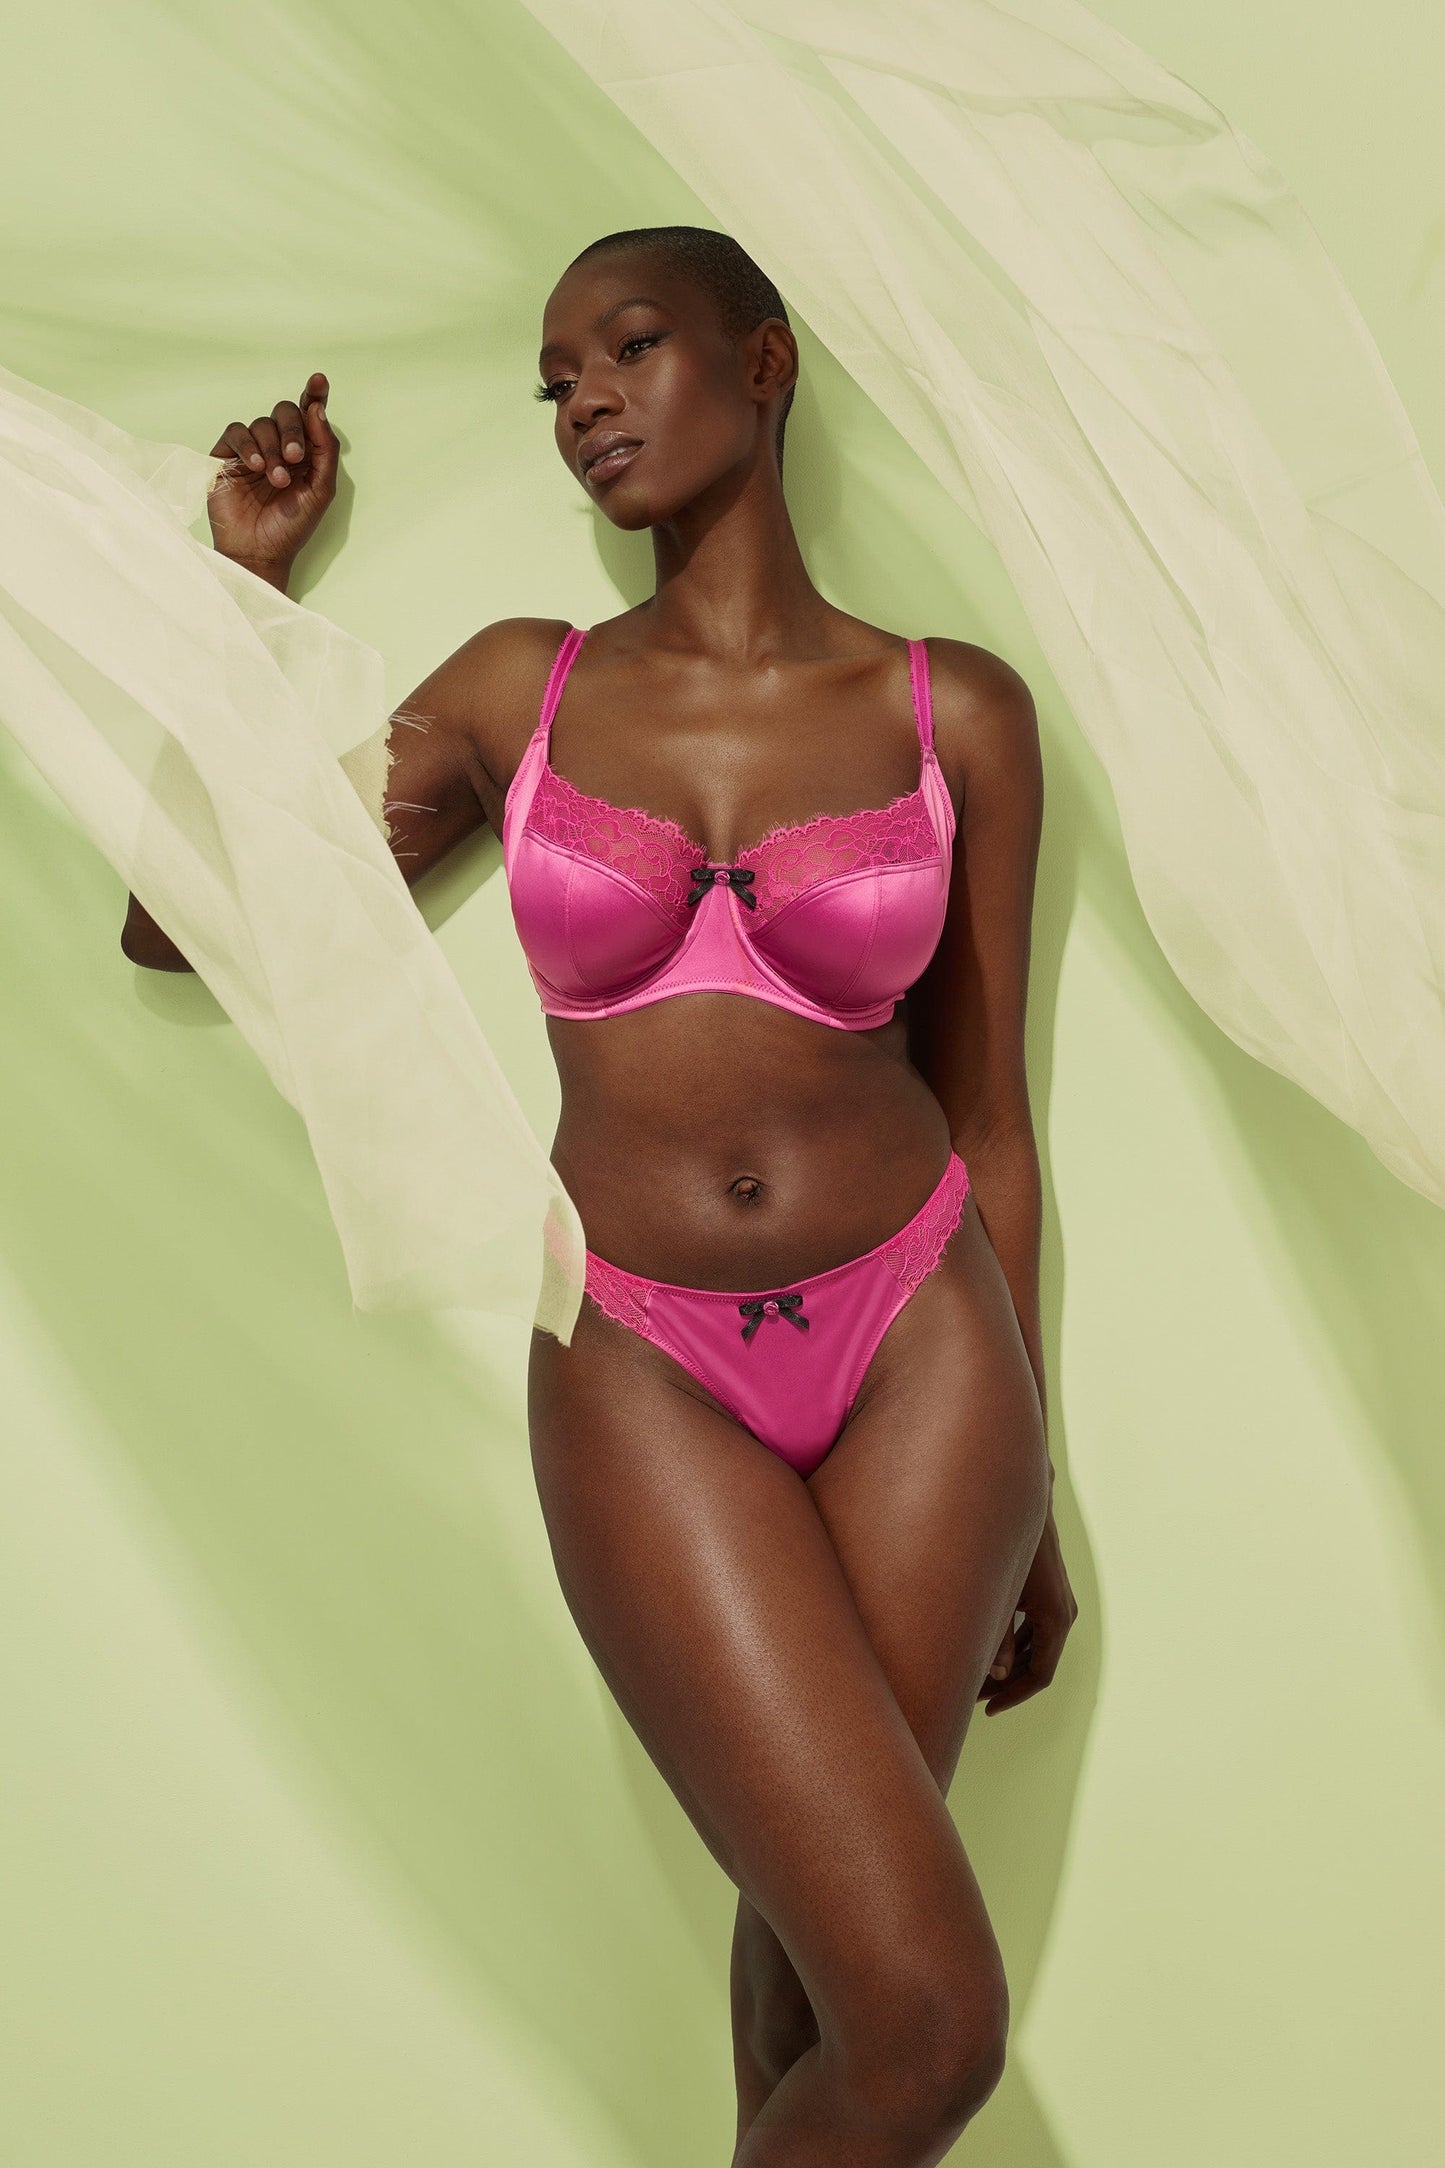 *Rosalyn Magenta Satin Lace Bra - 32-40 bands and D-H cups (UK size) *BUNDLE*